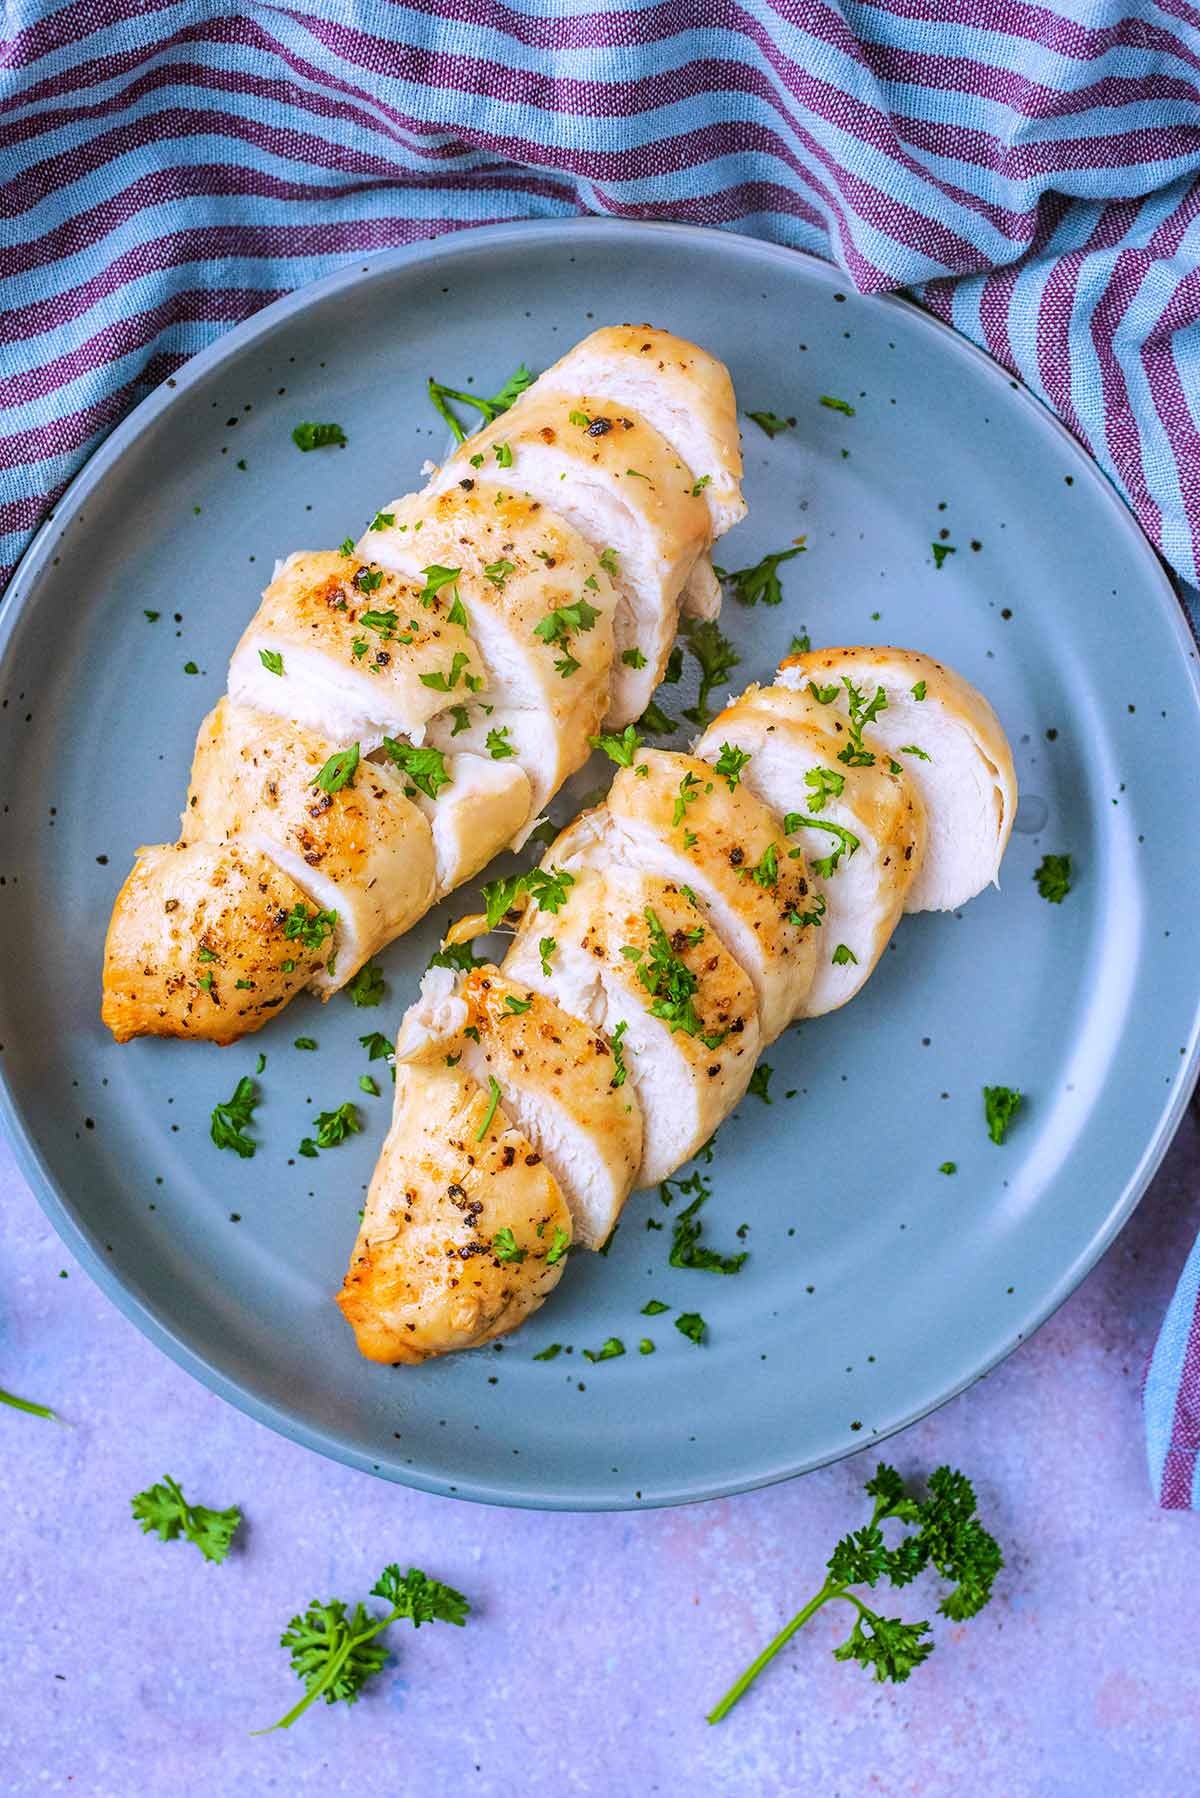 Two sliced chicken breasts on a plate.